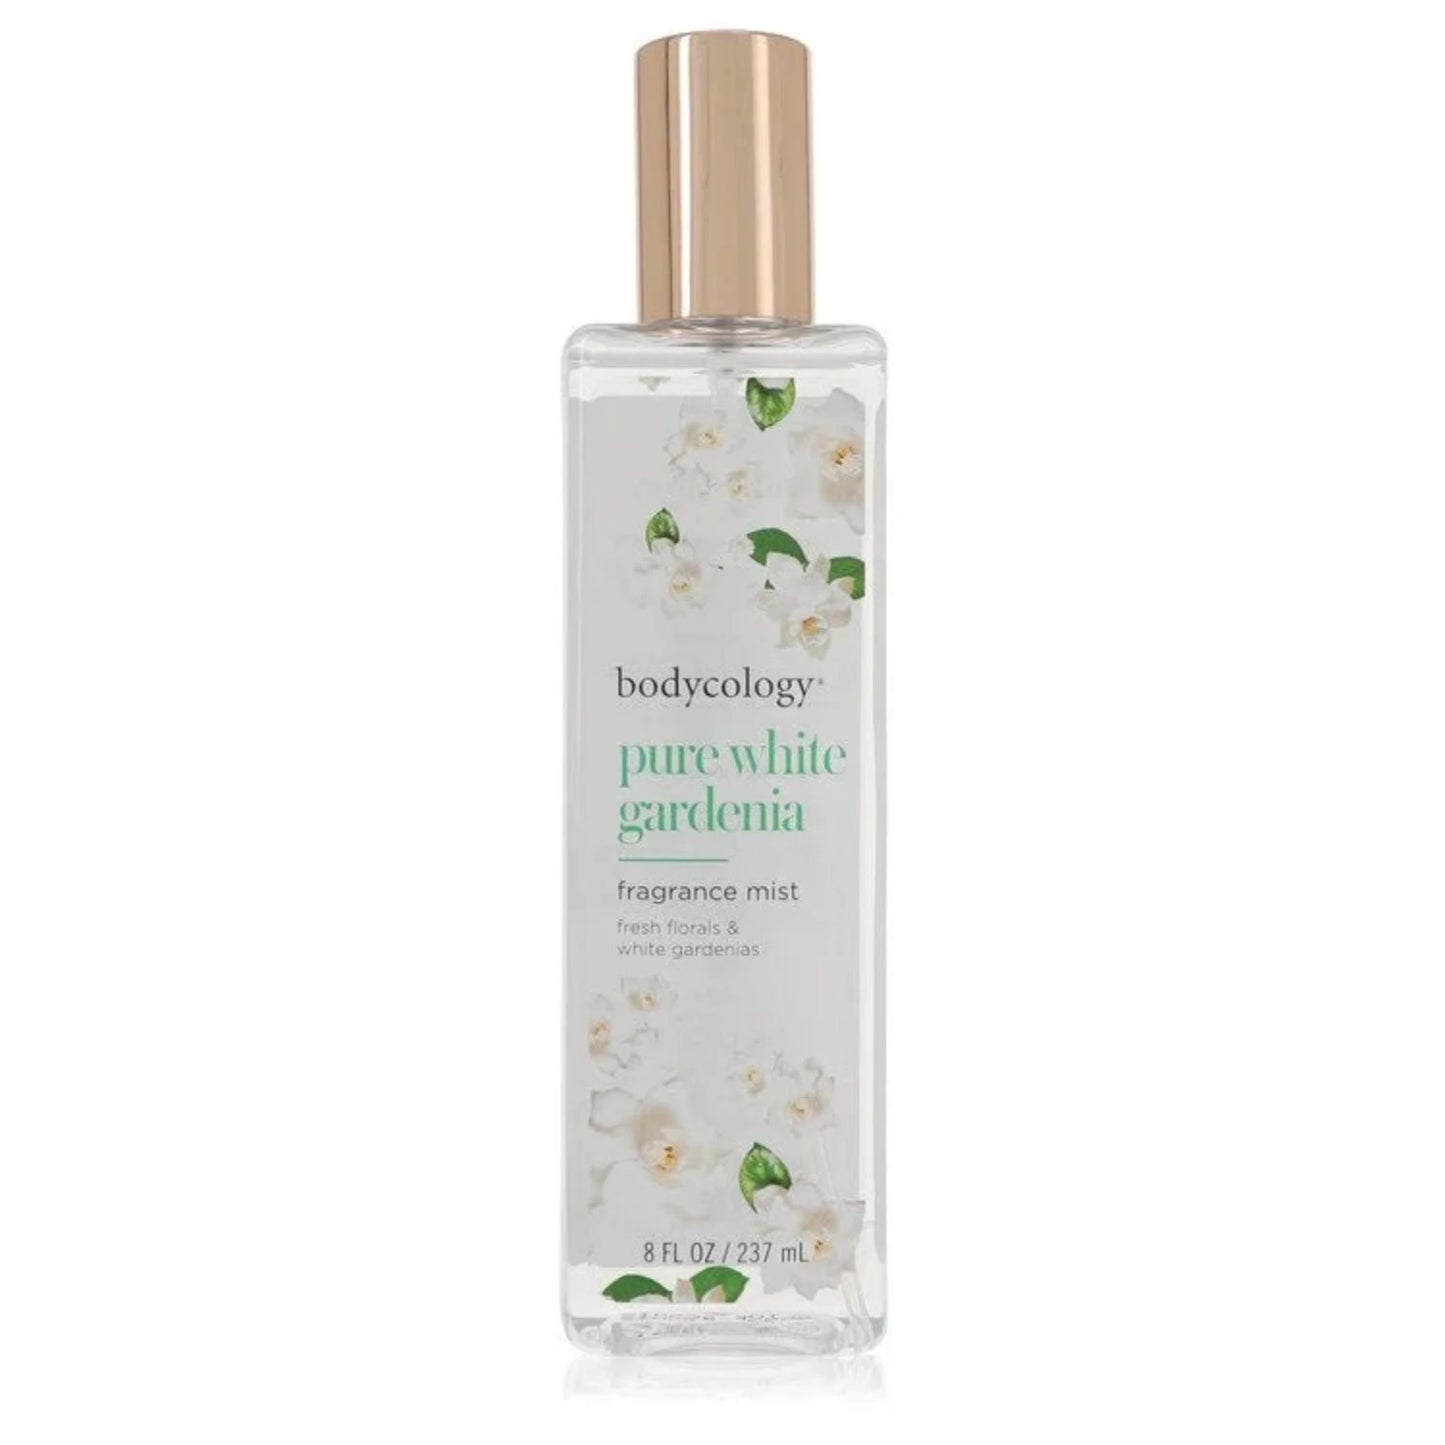 Bodycology Pure White Gardenia Fragrance Mist Spray By Bodycology for women, Parfums De Coeur